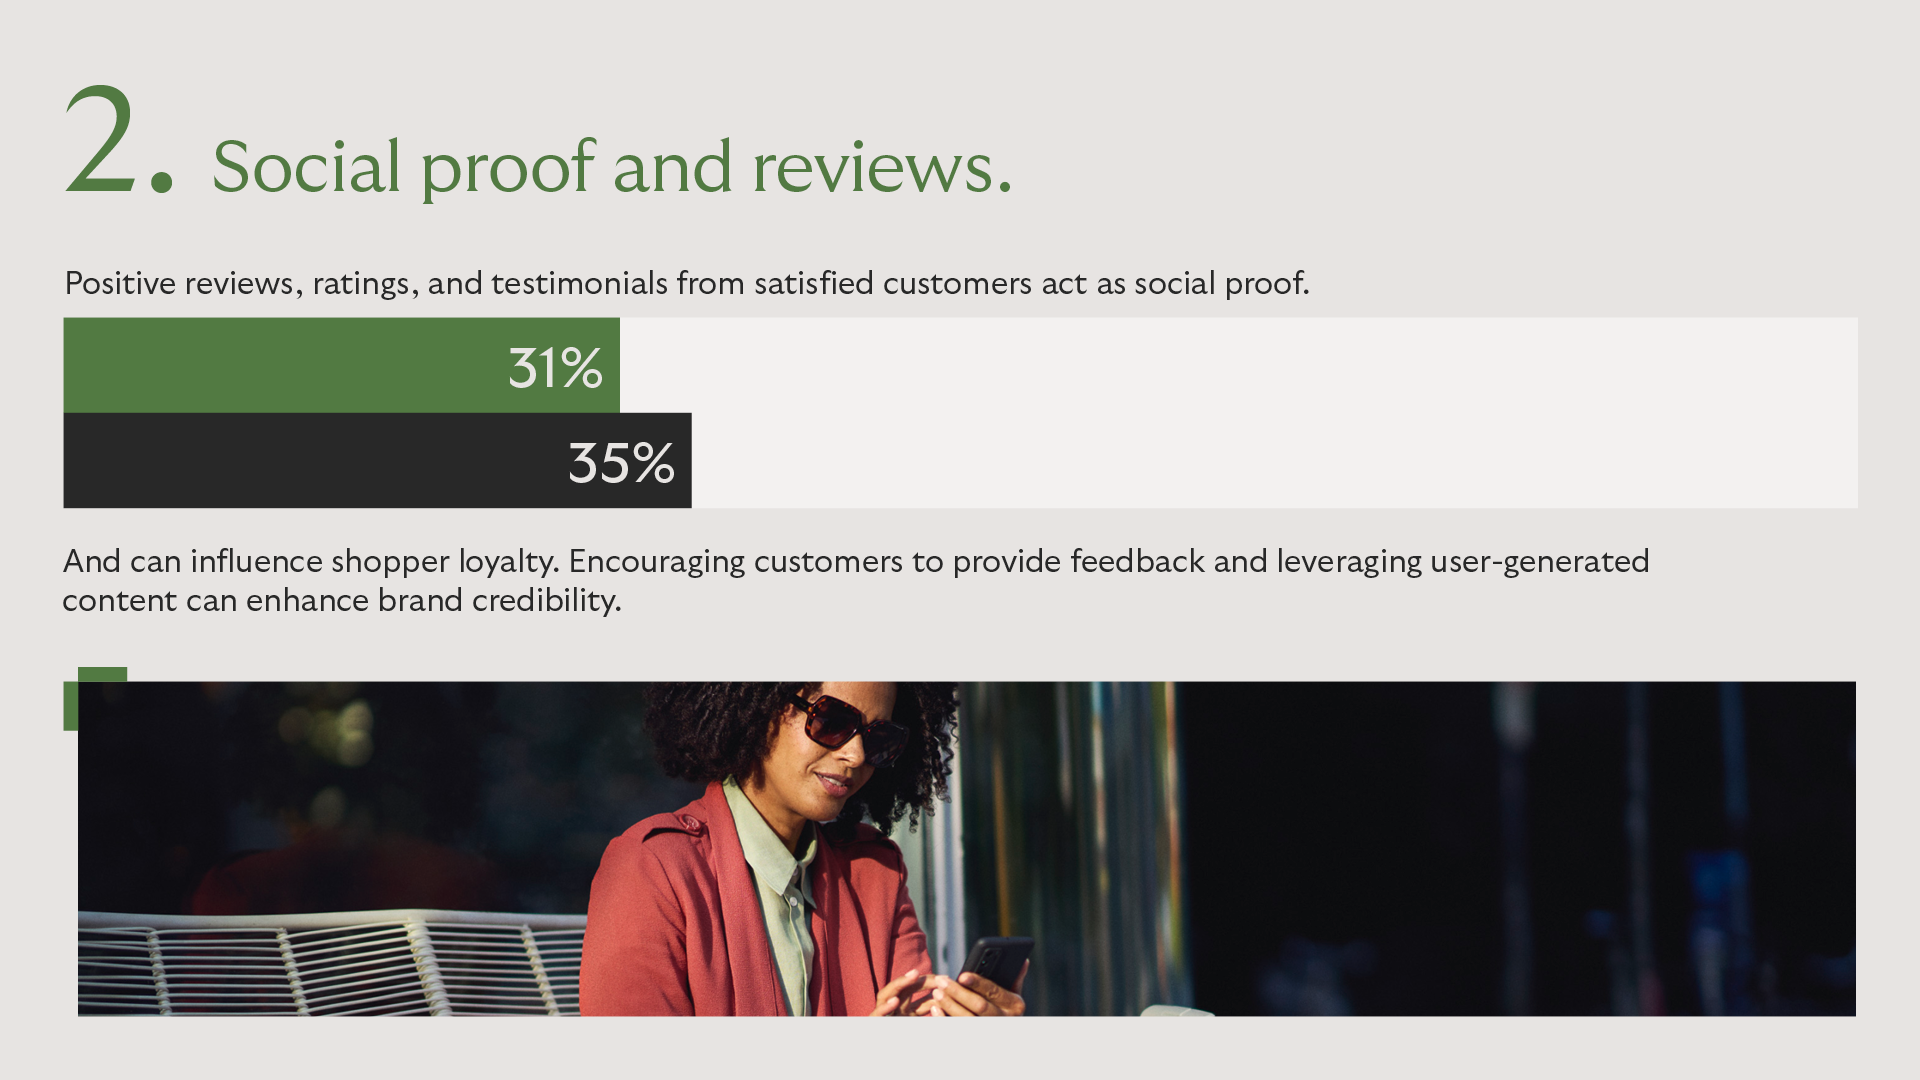 5. Social Proof and Reviews loyalty